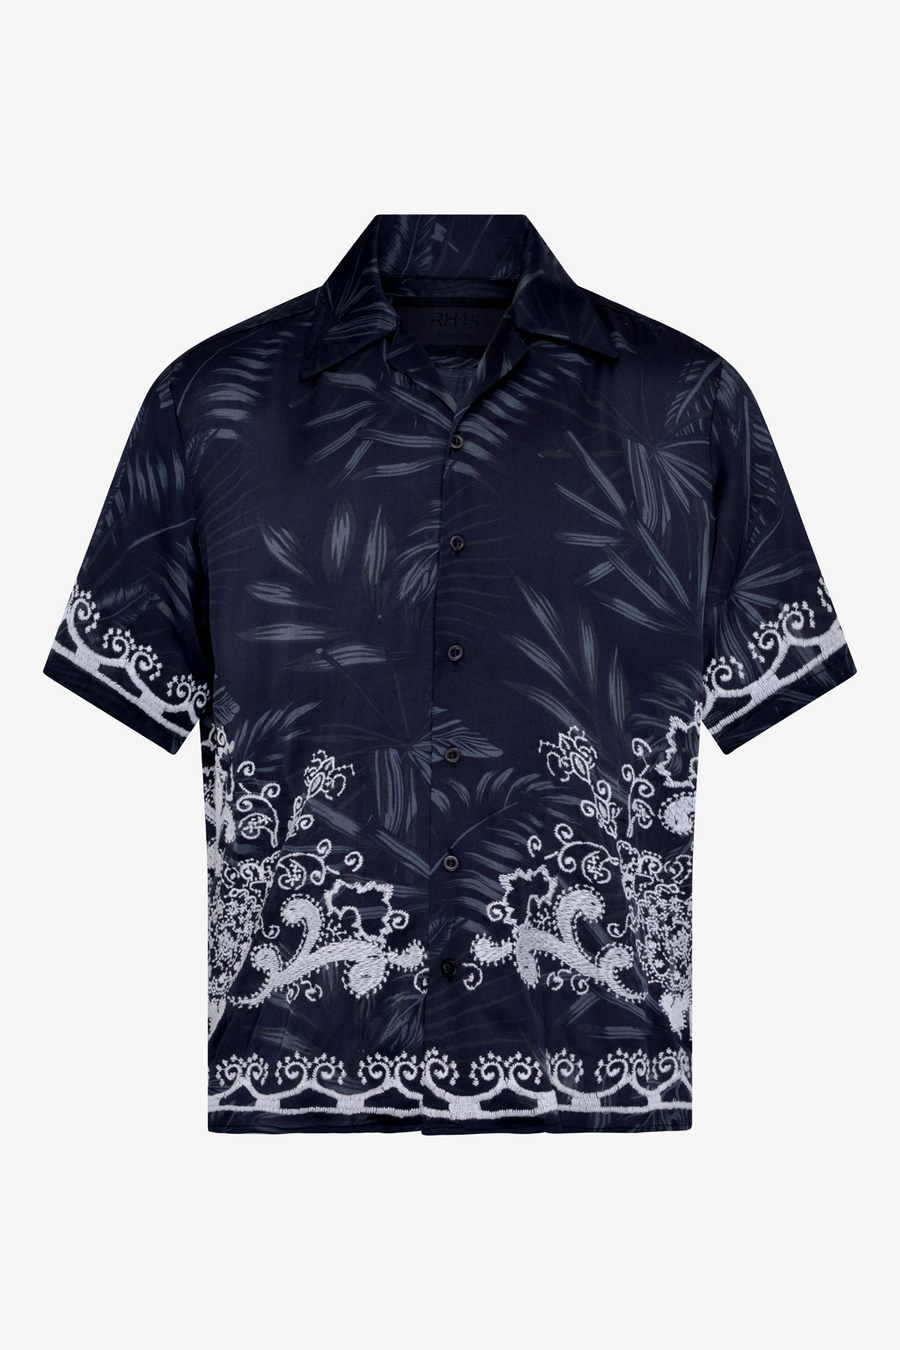 Buy the RH45 Lanai Hawaiian Embroidered Shirt in Navy/White at Intro. Spend £50 for free UK delivery. Official stockists. We ship worldwide.